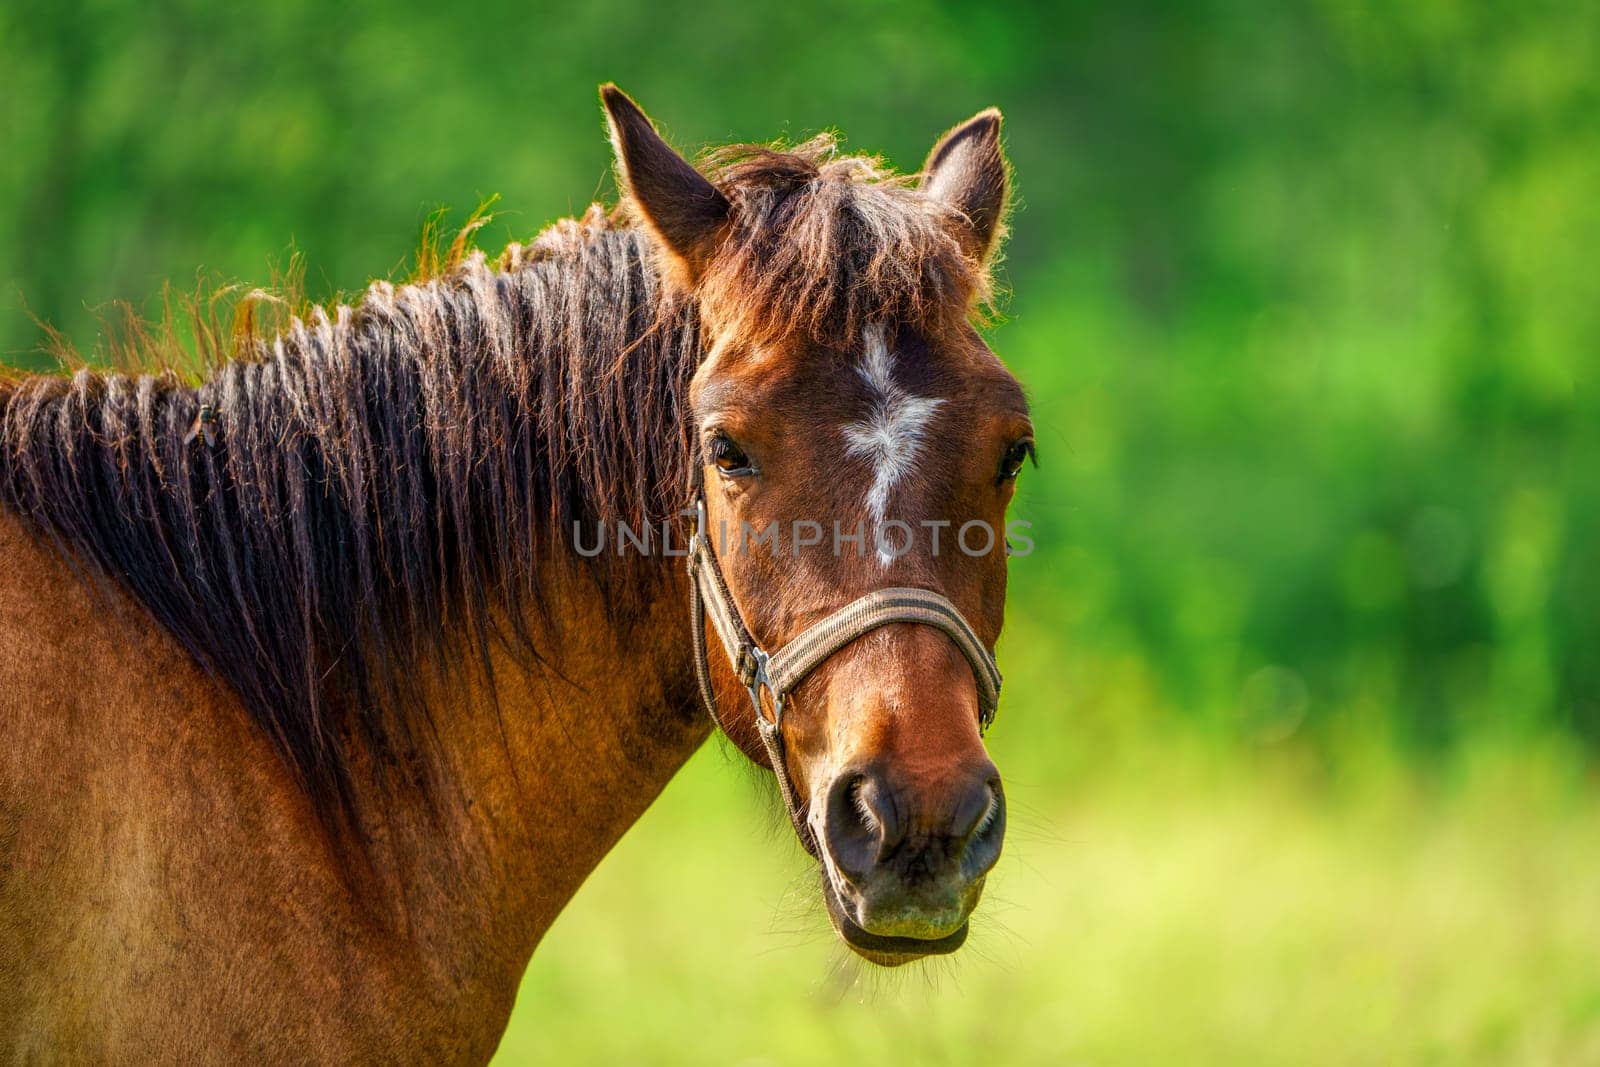 Majestic Beauty, A Close-Up Portrait of a Brown Horse against a Green Field. horse close up face by PhotoTime